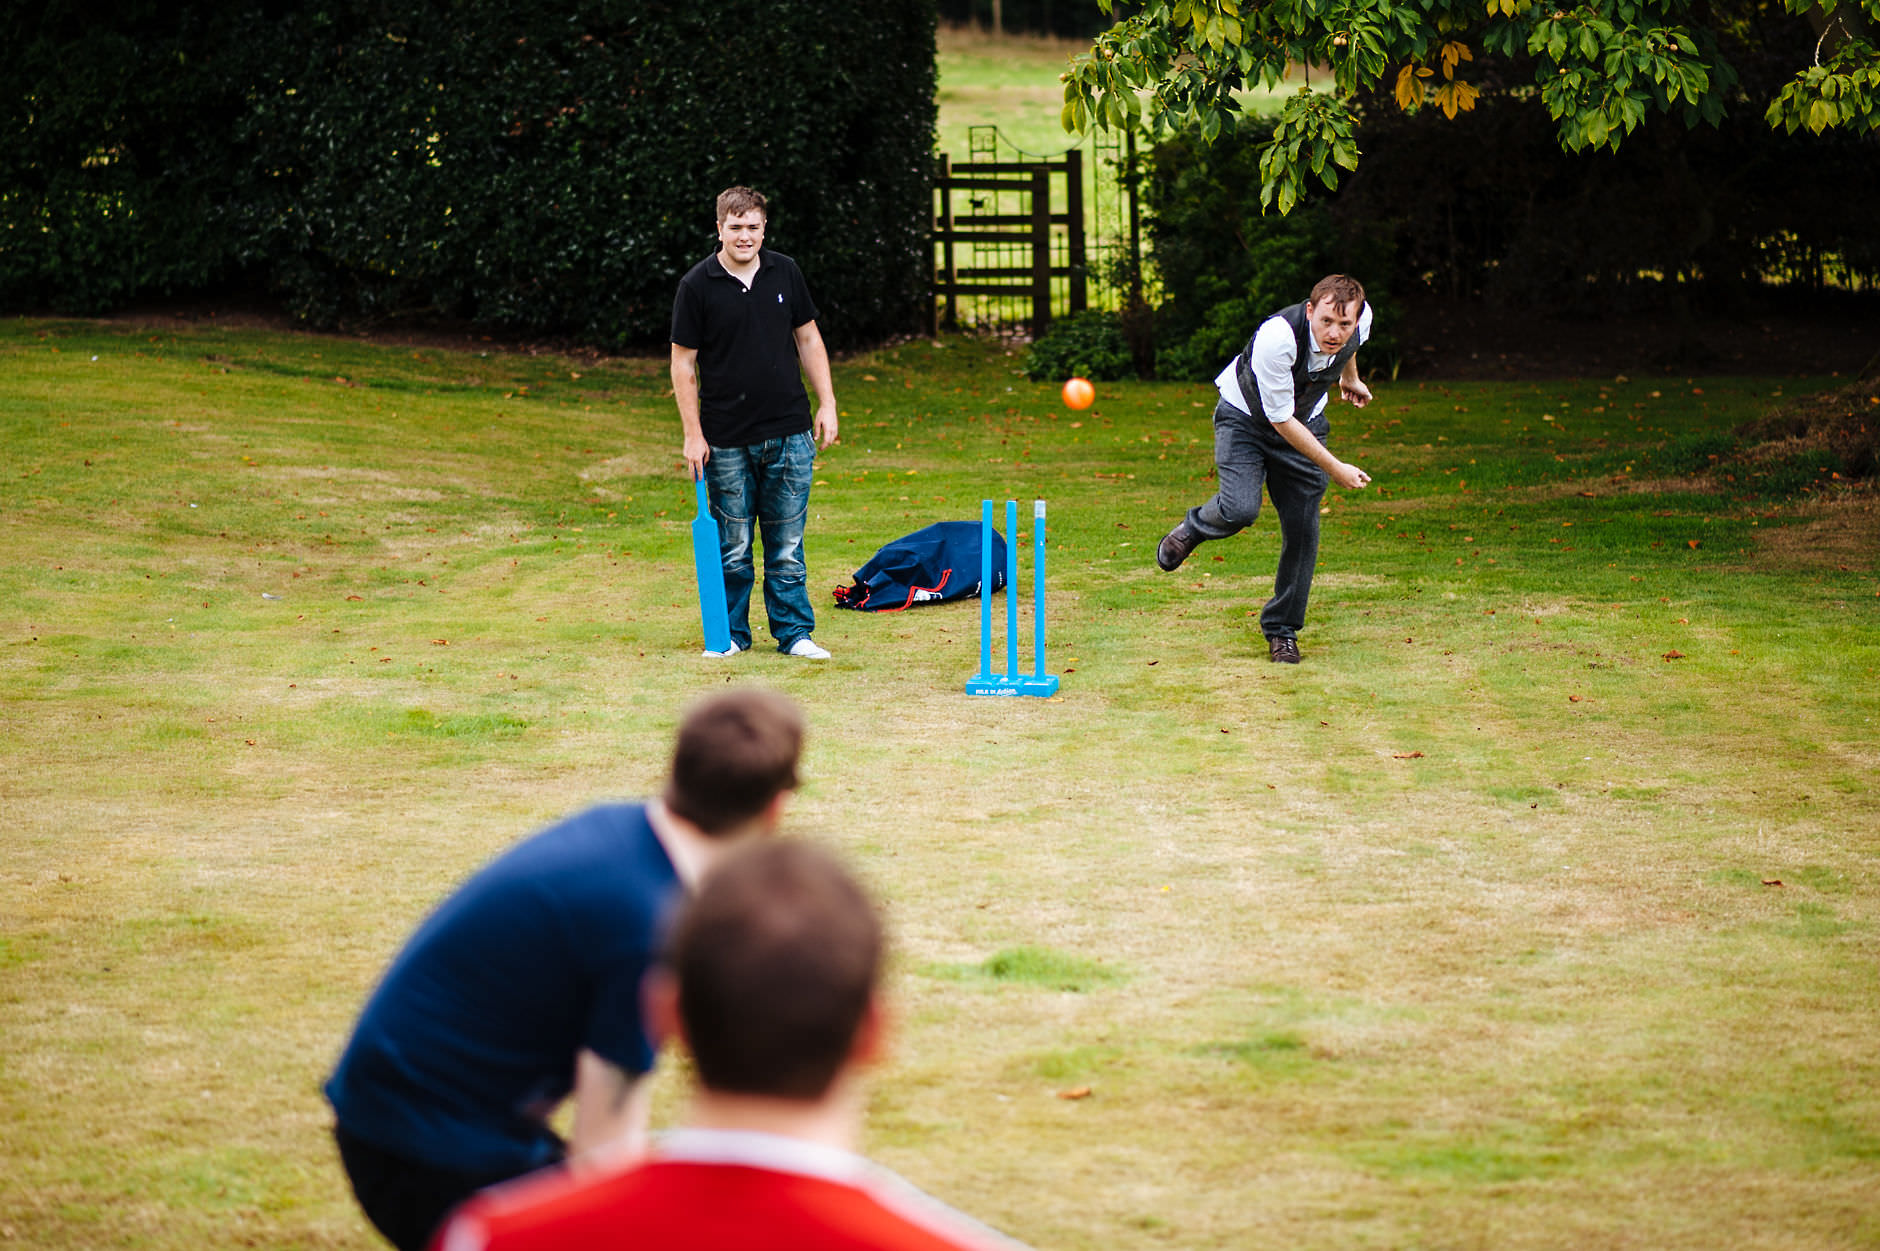 groom playing cricket with guests